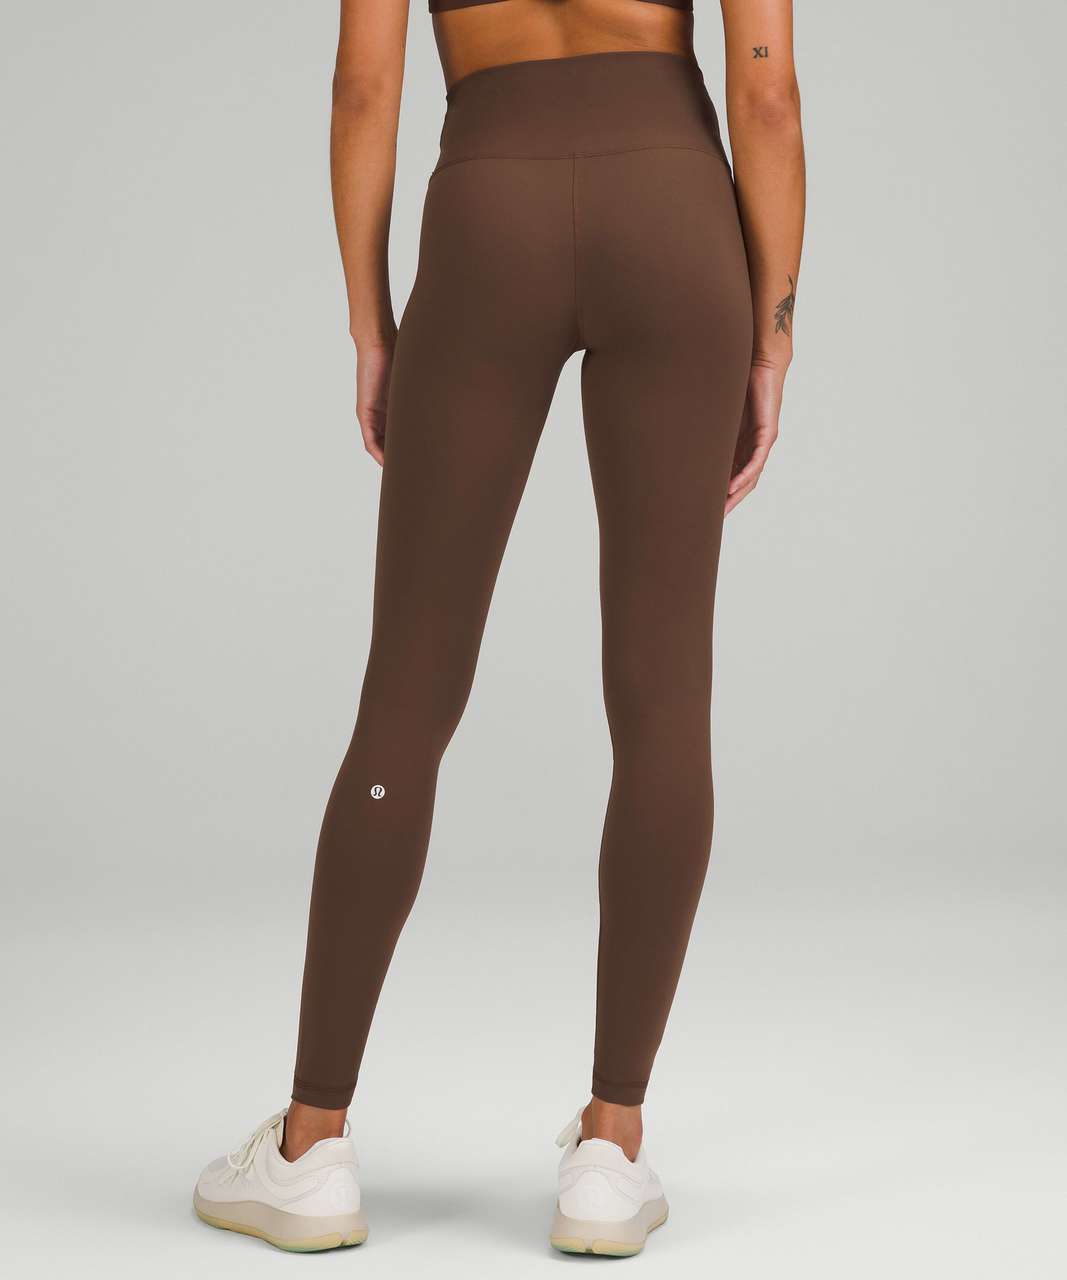 Wunder Train High-Rise Tight with Pockets 28, Women's Leggings/Tights, lululemon